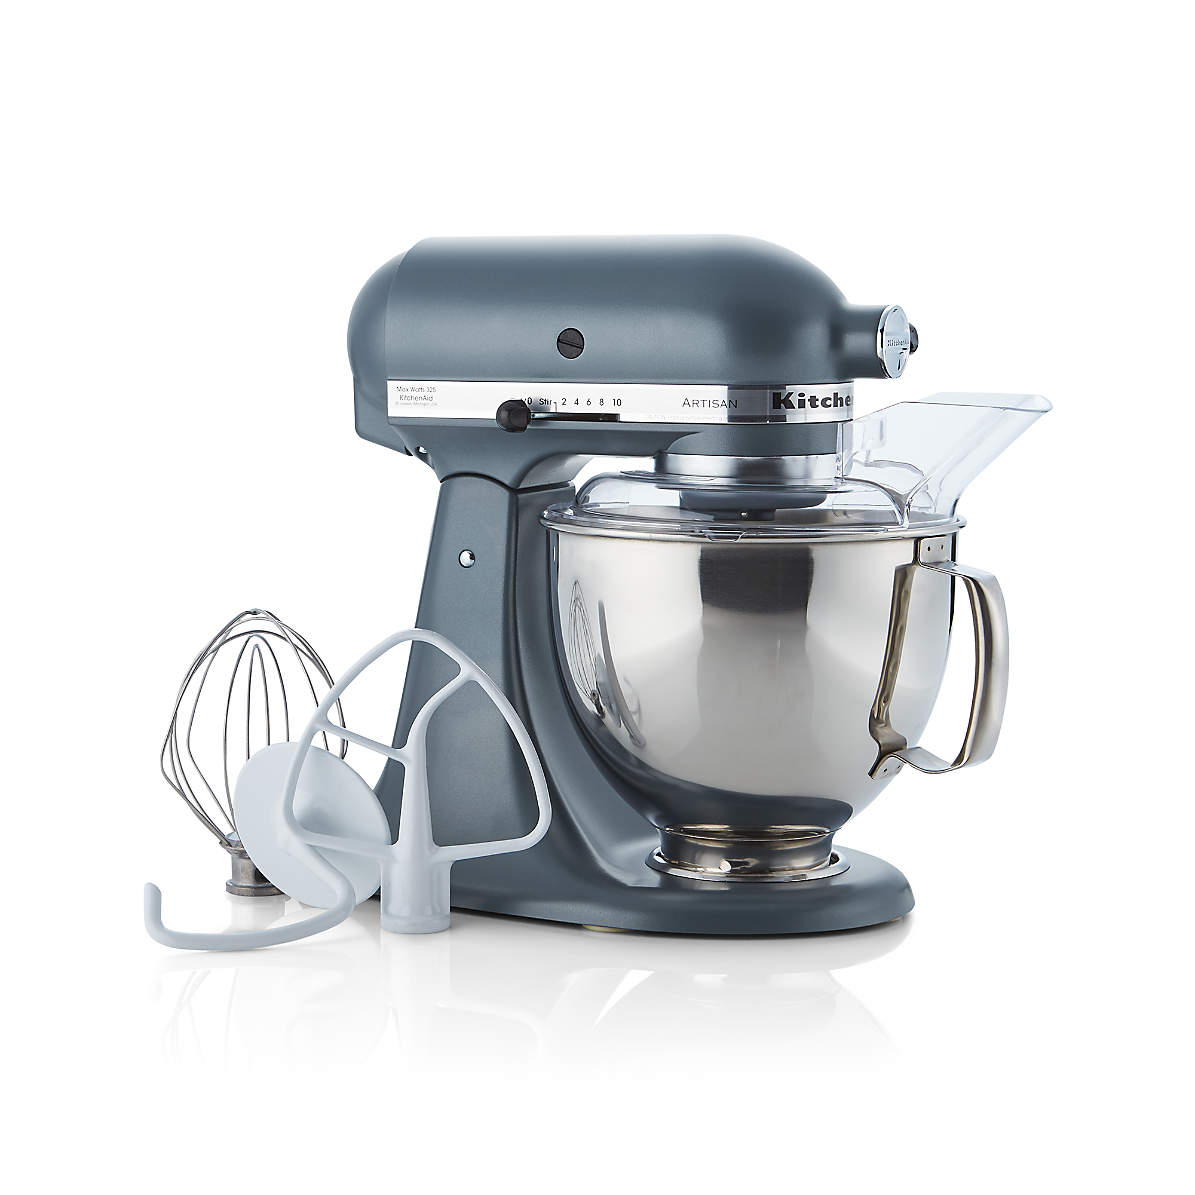 Kitchenaid Artisan Steel Blue Stand Mixer Reviews Crate And Barrel